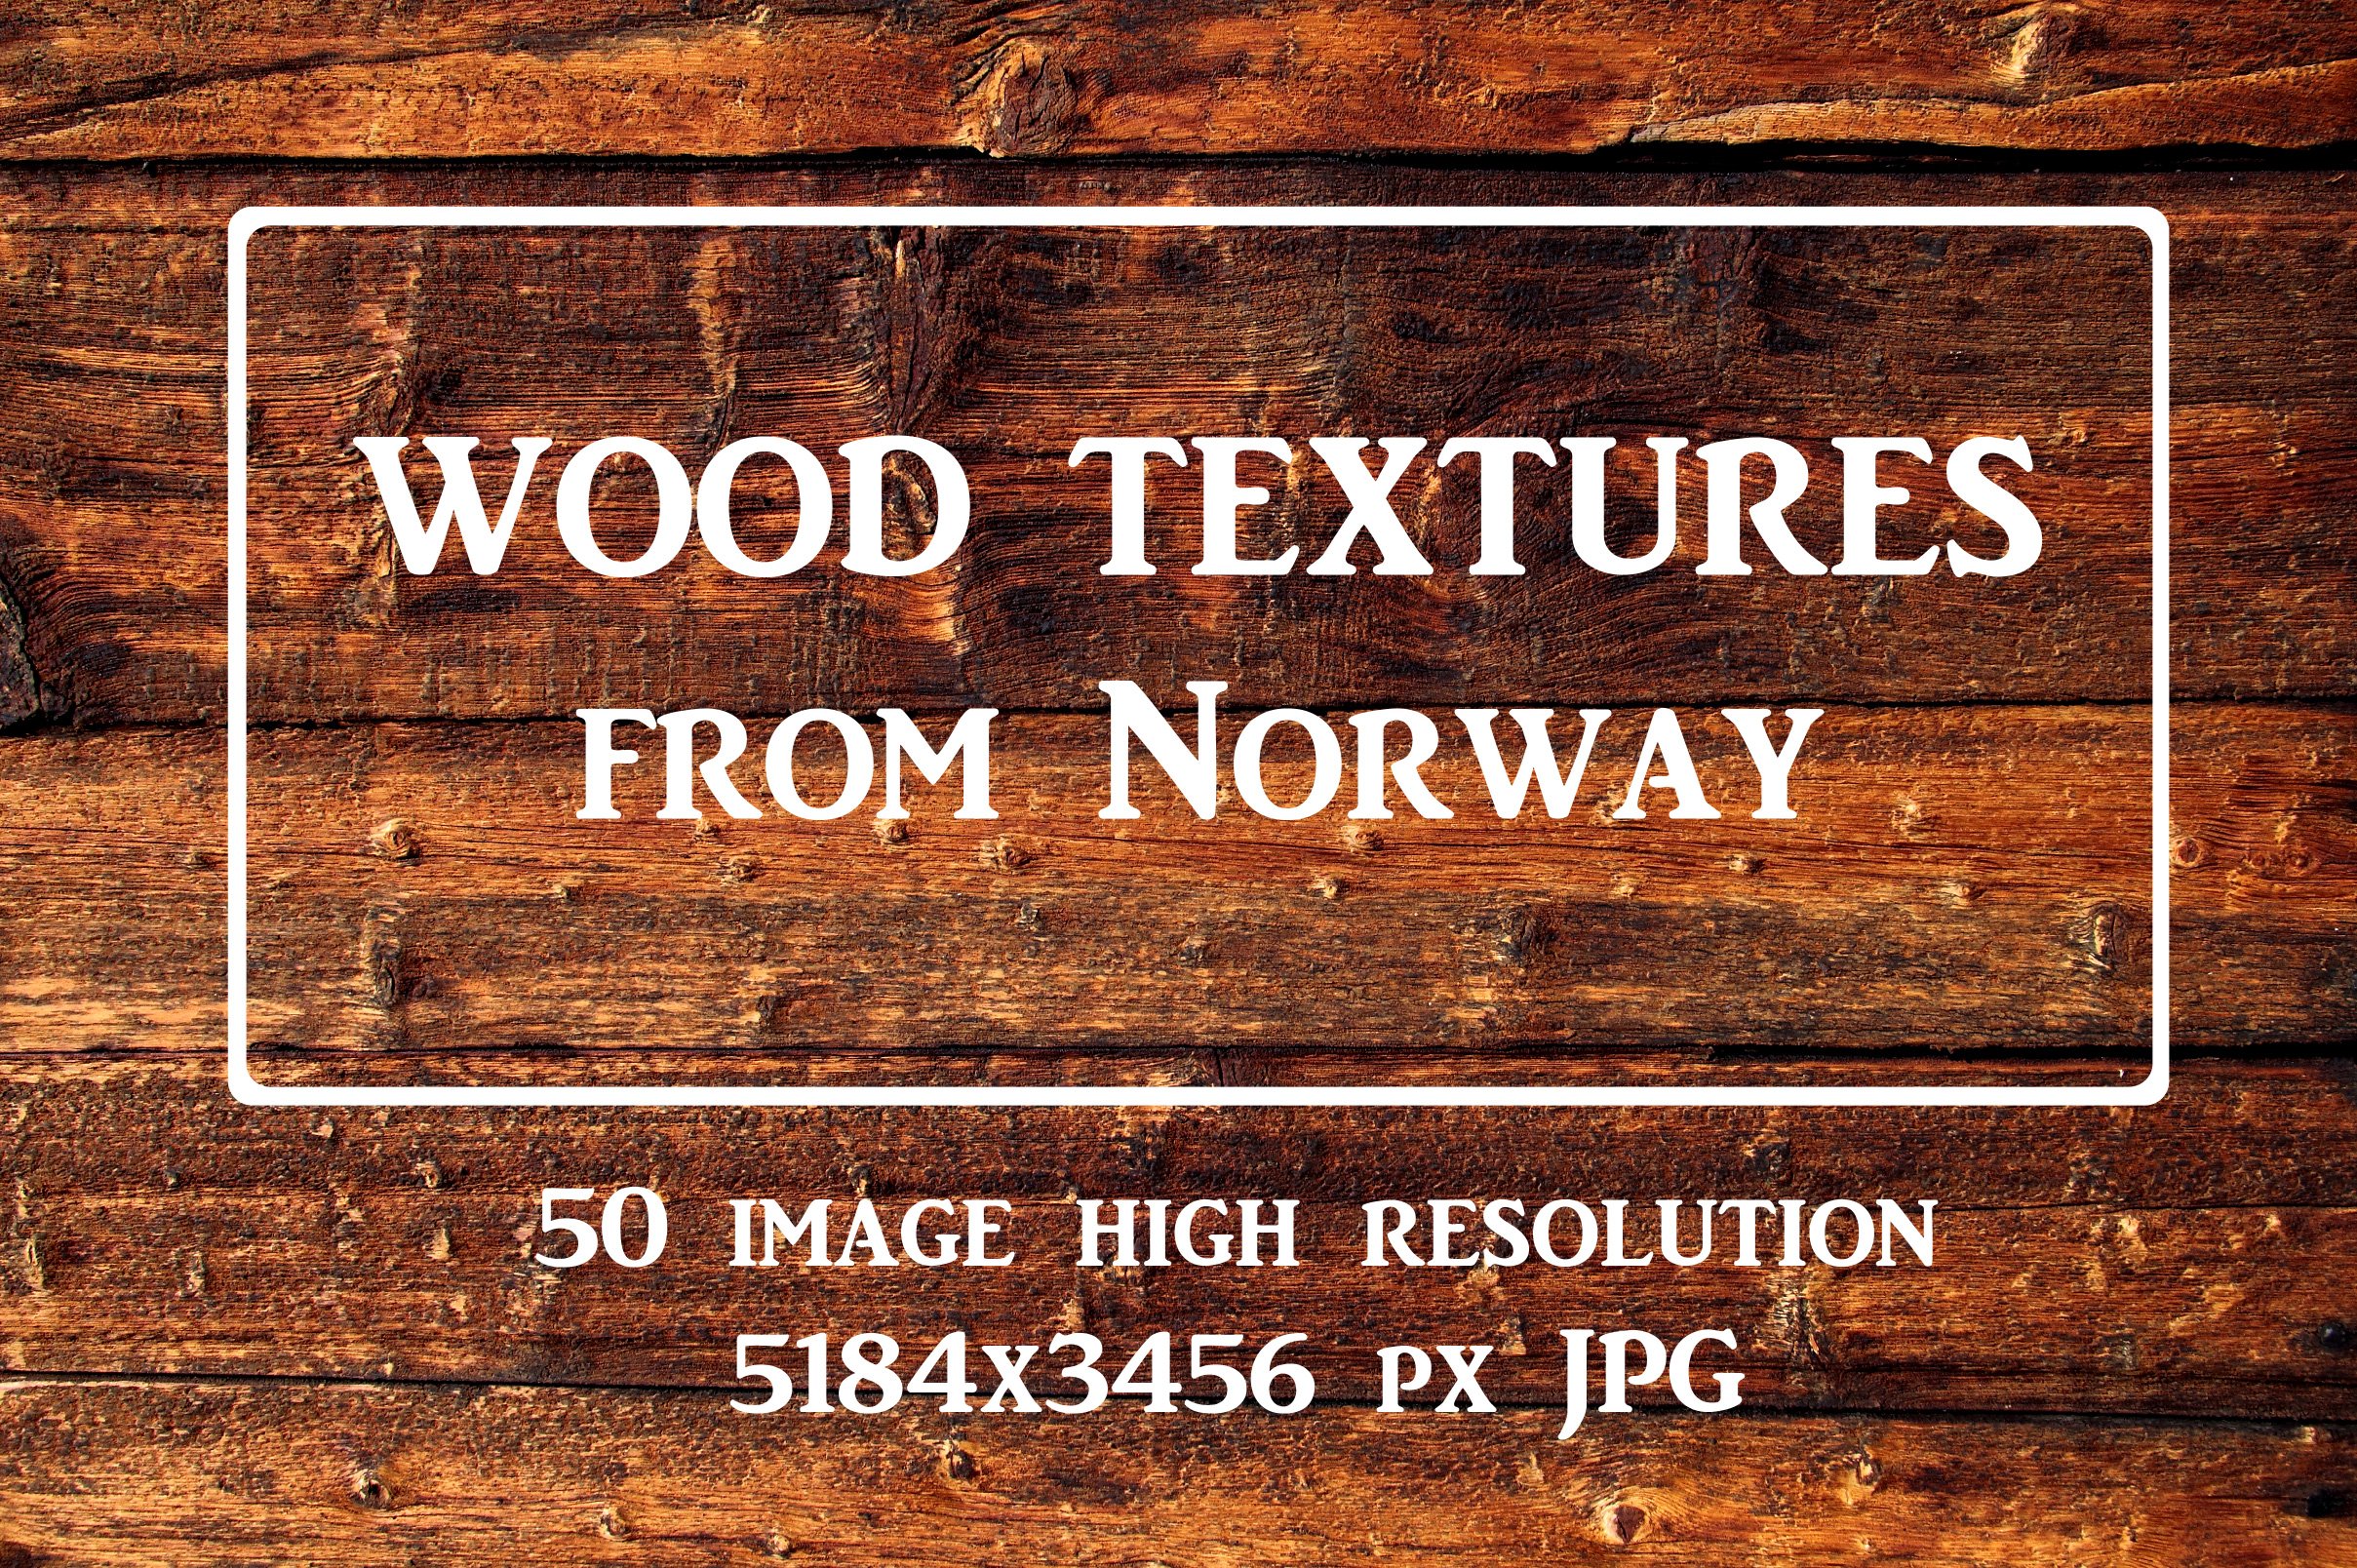 Wood textures from Norway cover image.